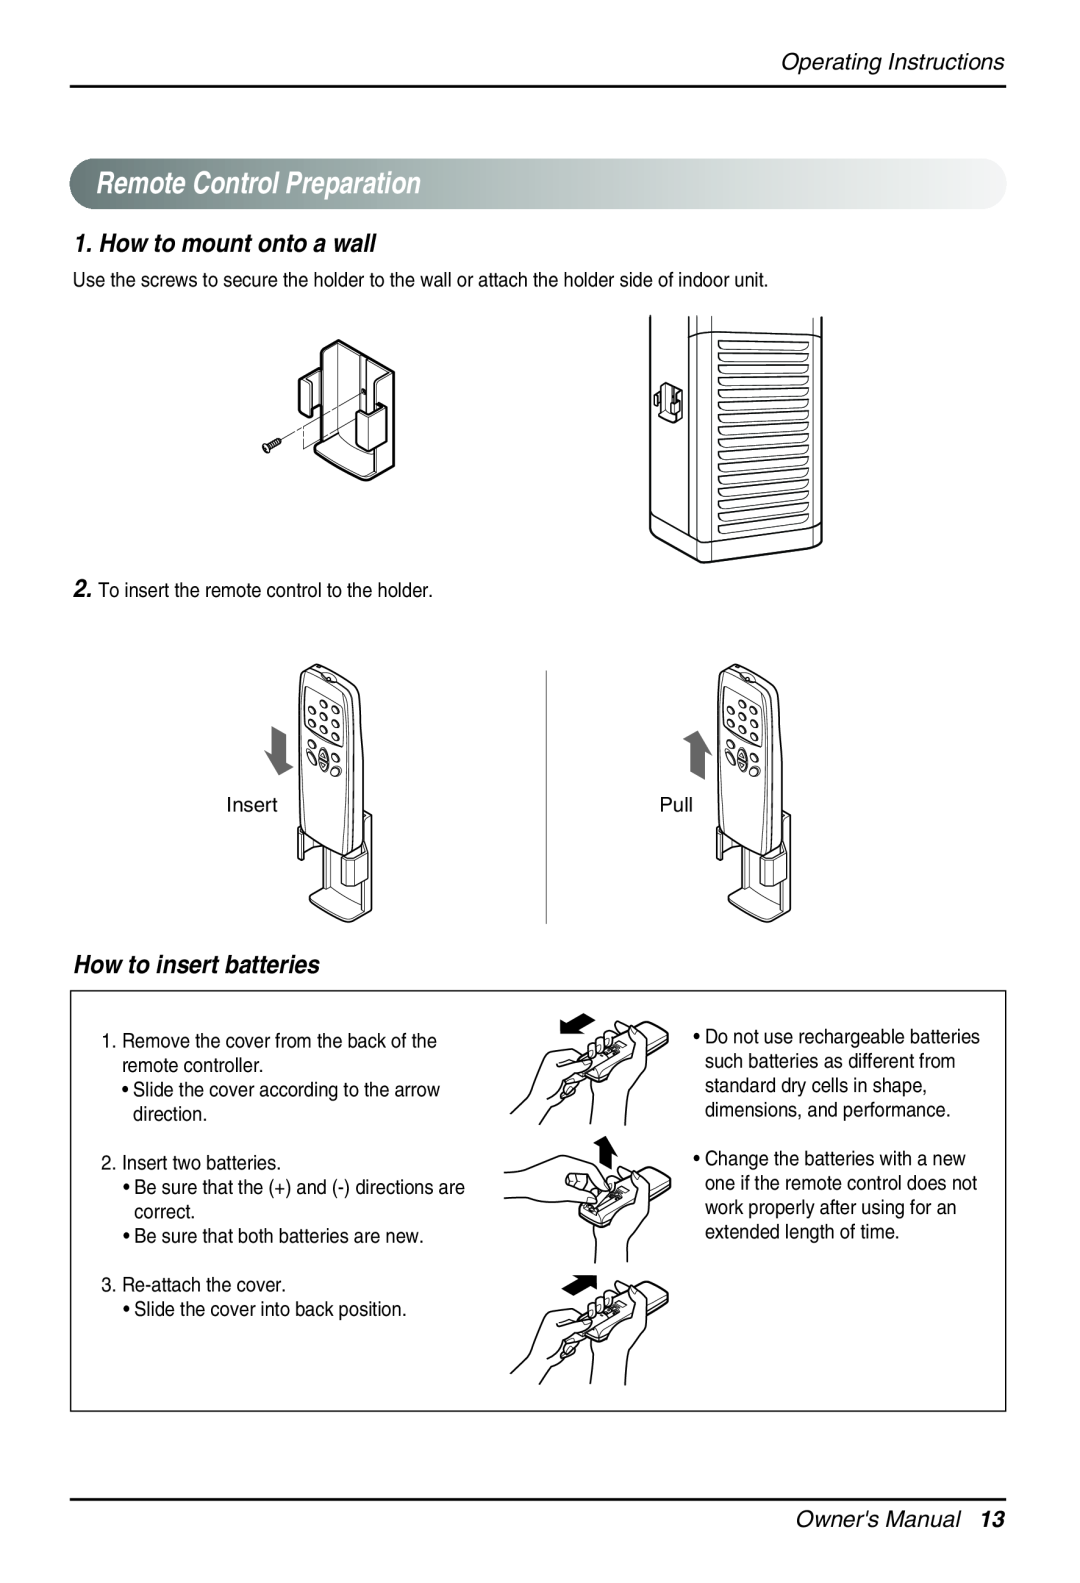 Beko LG-BKE 9300 D owner manual RemoteControlPreparation, How to mount onto a wall, How to insert batteries, English 